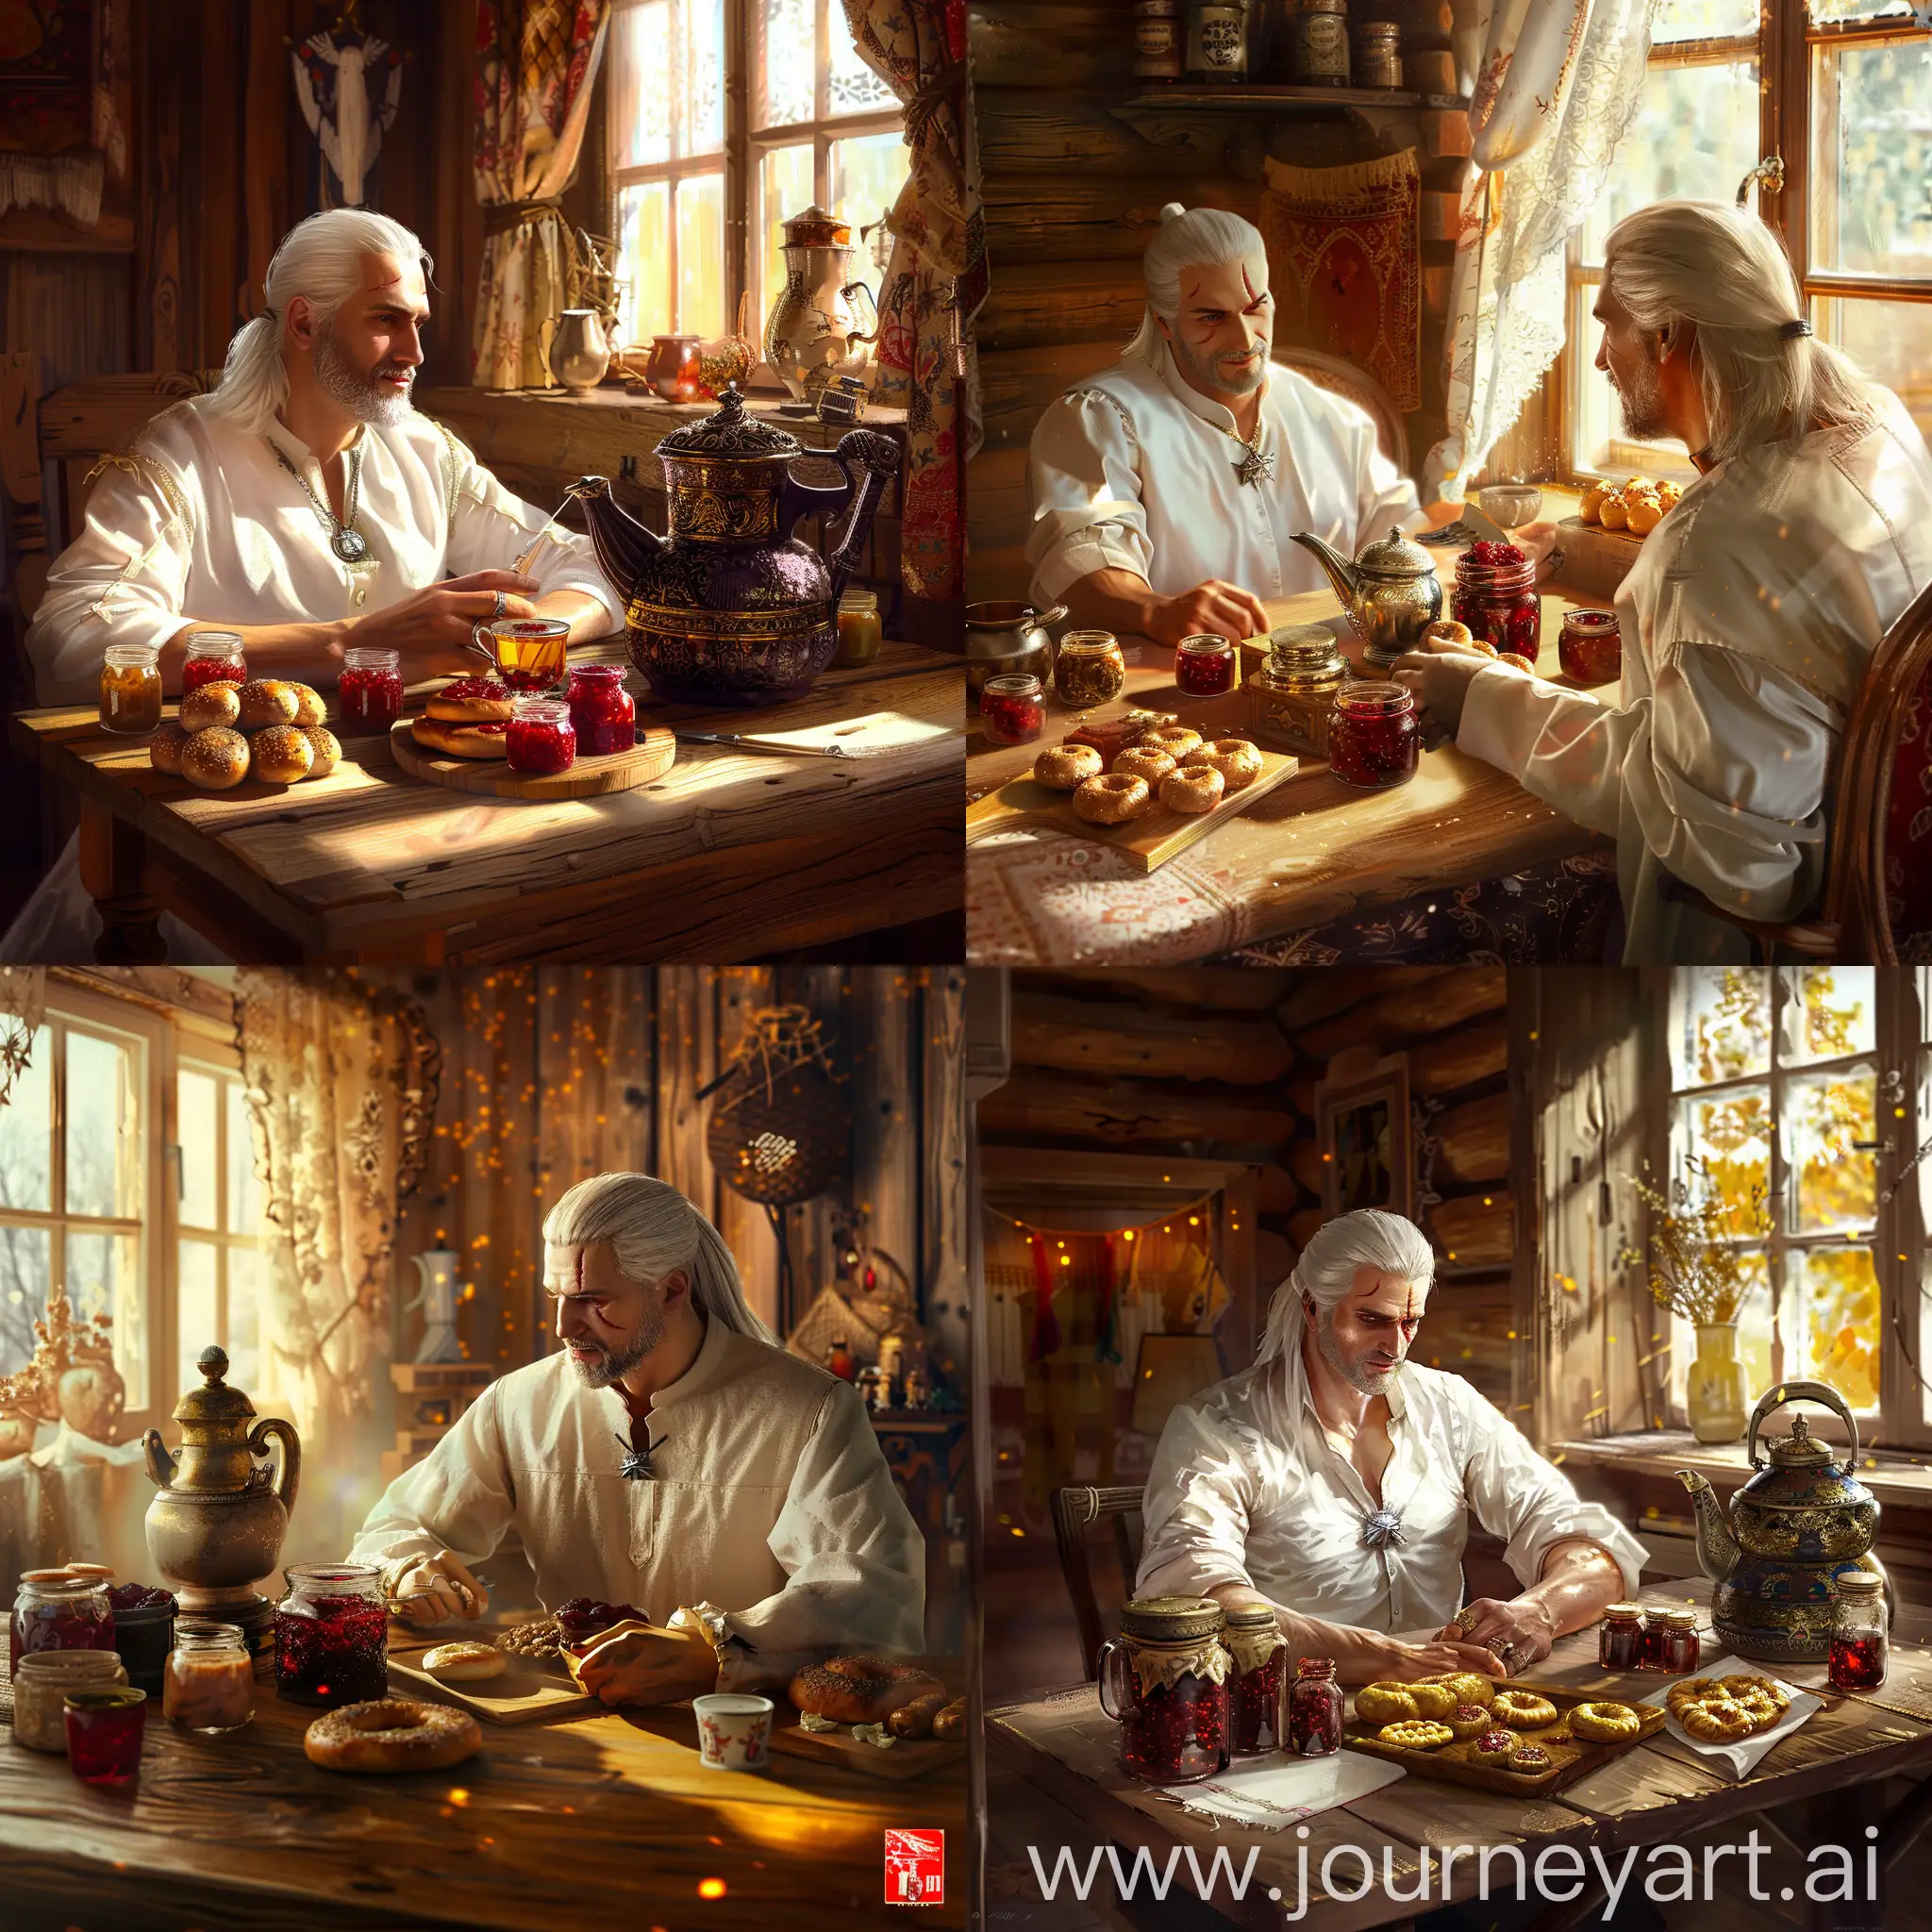 Geralt of Rivia, visiting a Russian grandmother at her home, sitting at a wooden table with a samovar, bagels, jars of jam, and cups of tea. He is wearing a traditional Slavic white shirt. The scene is bathed in warm, golden sunlight streaming through a window, with traditional Russian decor in the background. The style should resemble the visual aesthetics of the Witcher 3 game, with detailed textures and a slightly gritty, realistic look